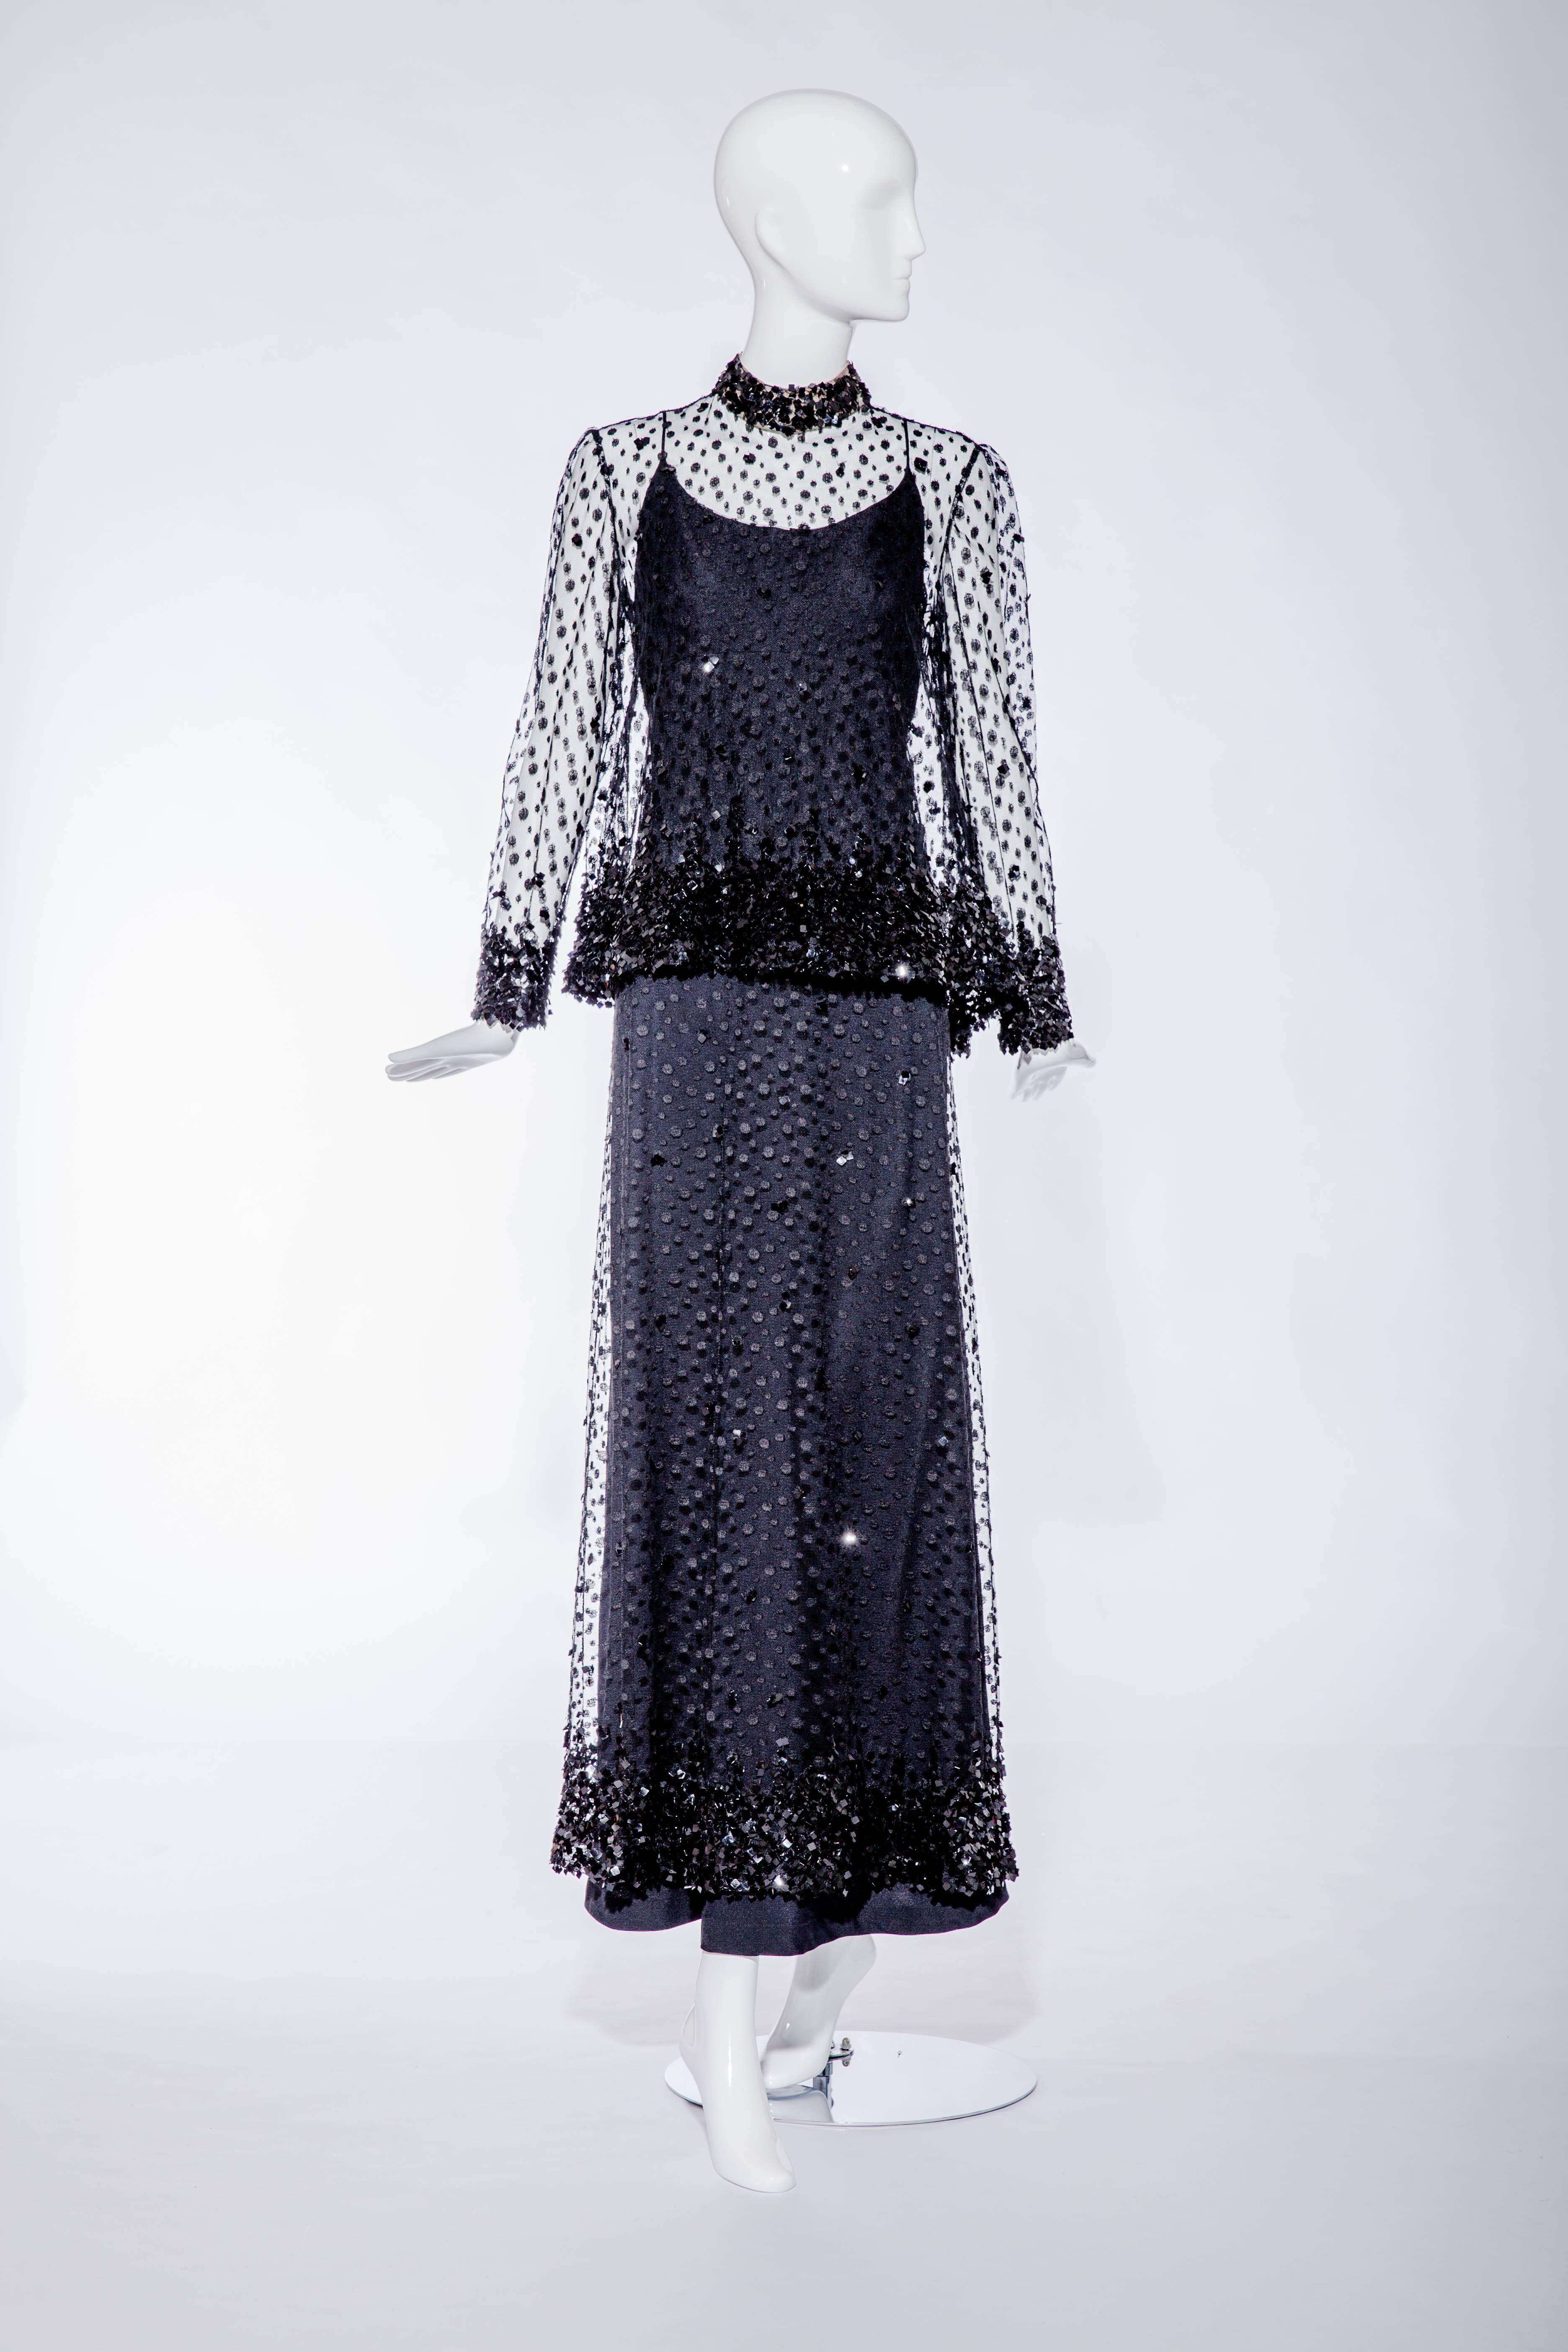 This black lace gown with capelet is a 1970s creation by Alfred Bosand.  The gown has spaghetti straps and is constructed with black silk crepe that has an overlay of lace that is paillette-embellished.  The lace net is painstakingly covered with